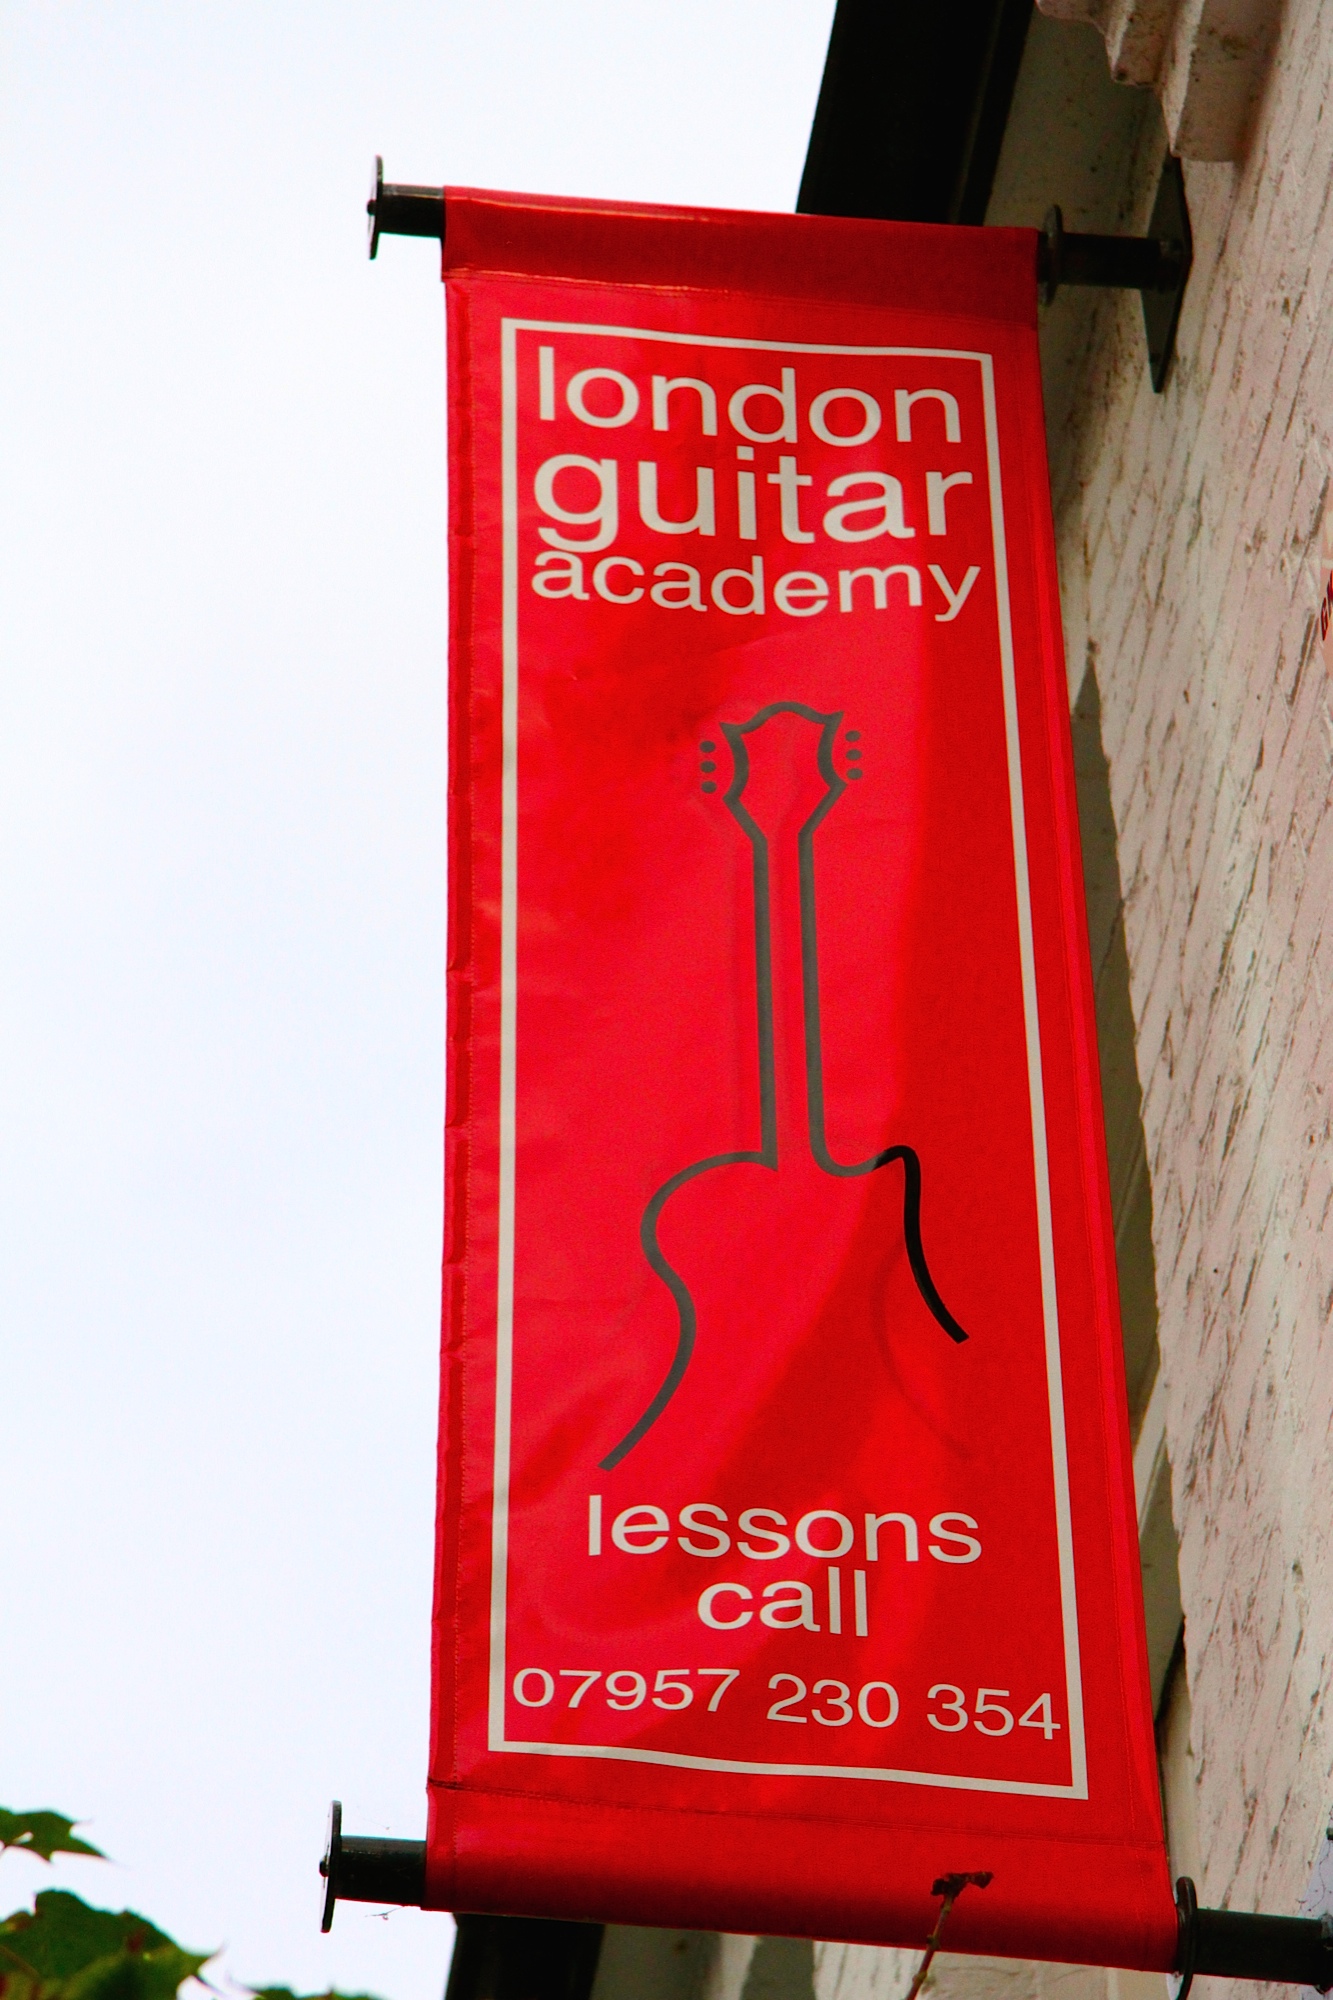 Guitar Lessons London google+ page